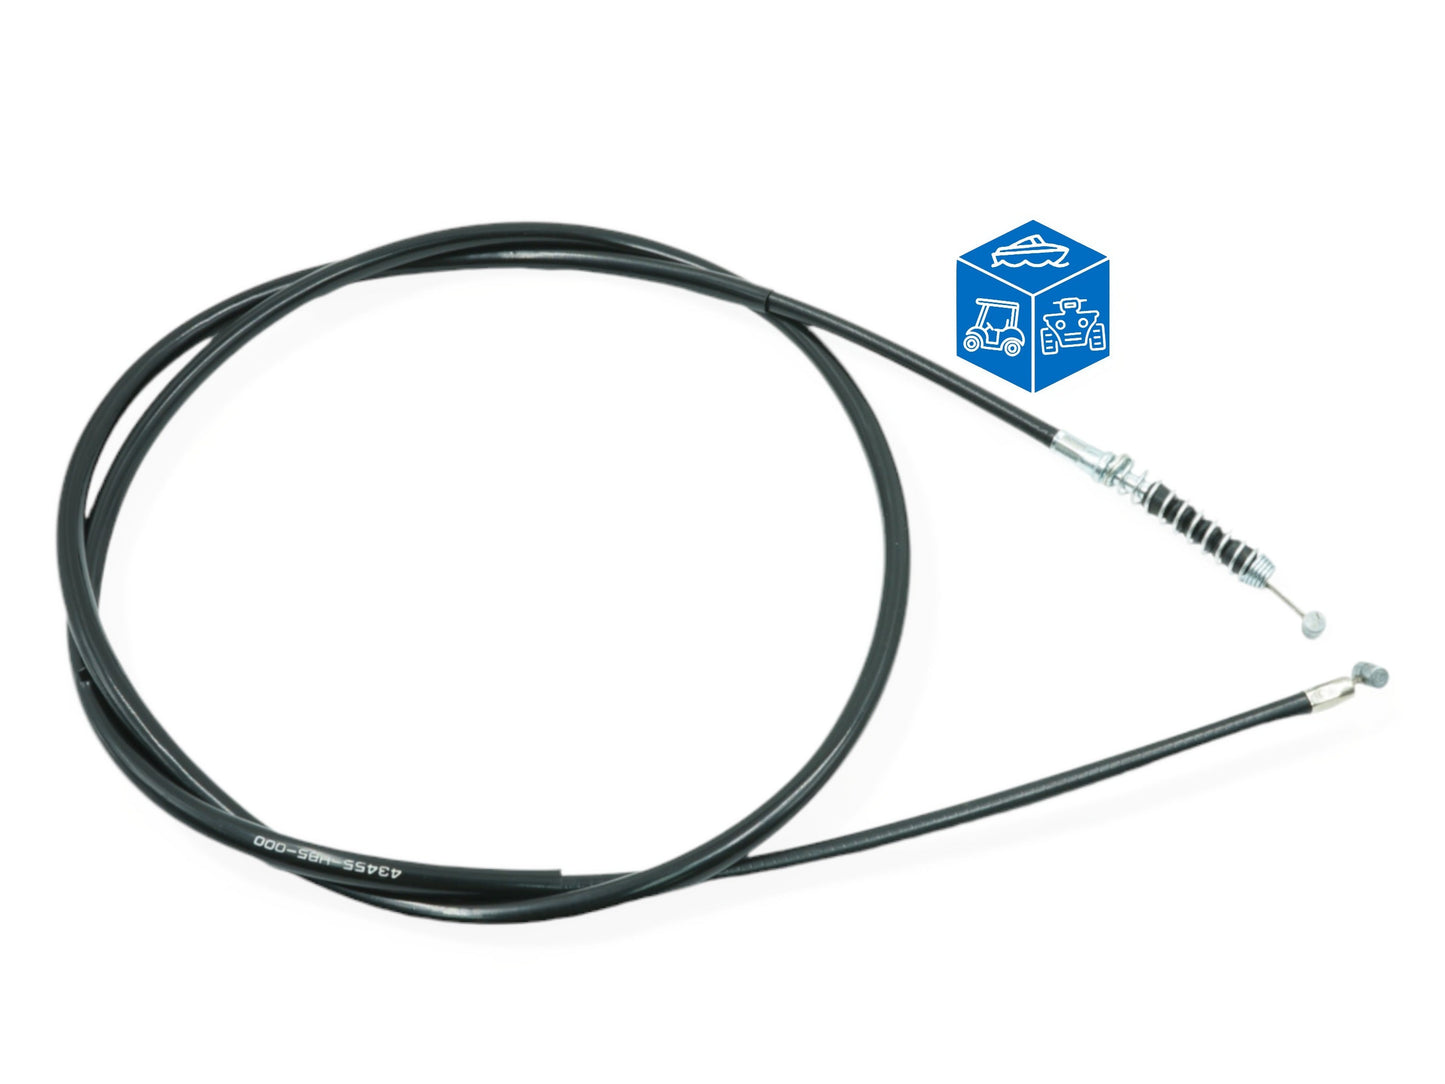 New Replacement Rear Hand Brake Cable Fits Honda ATC350x 1985-1986 Vintage